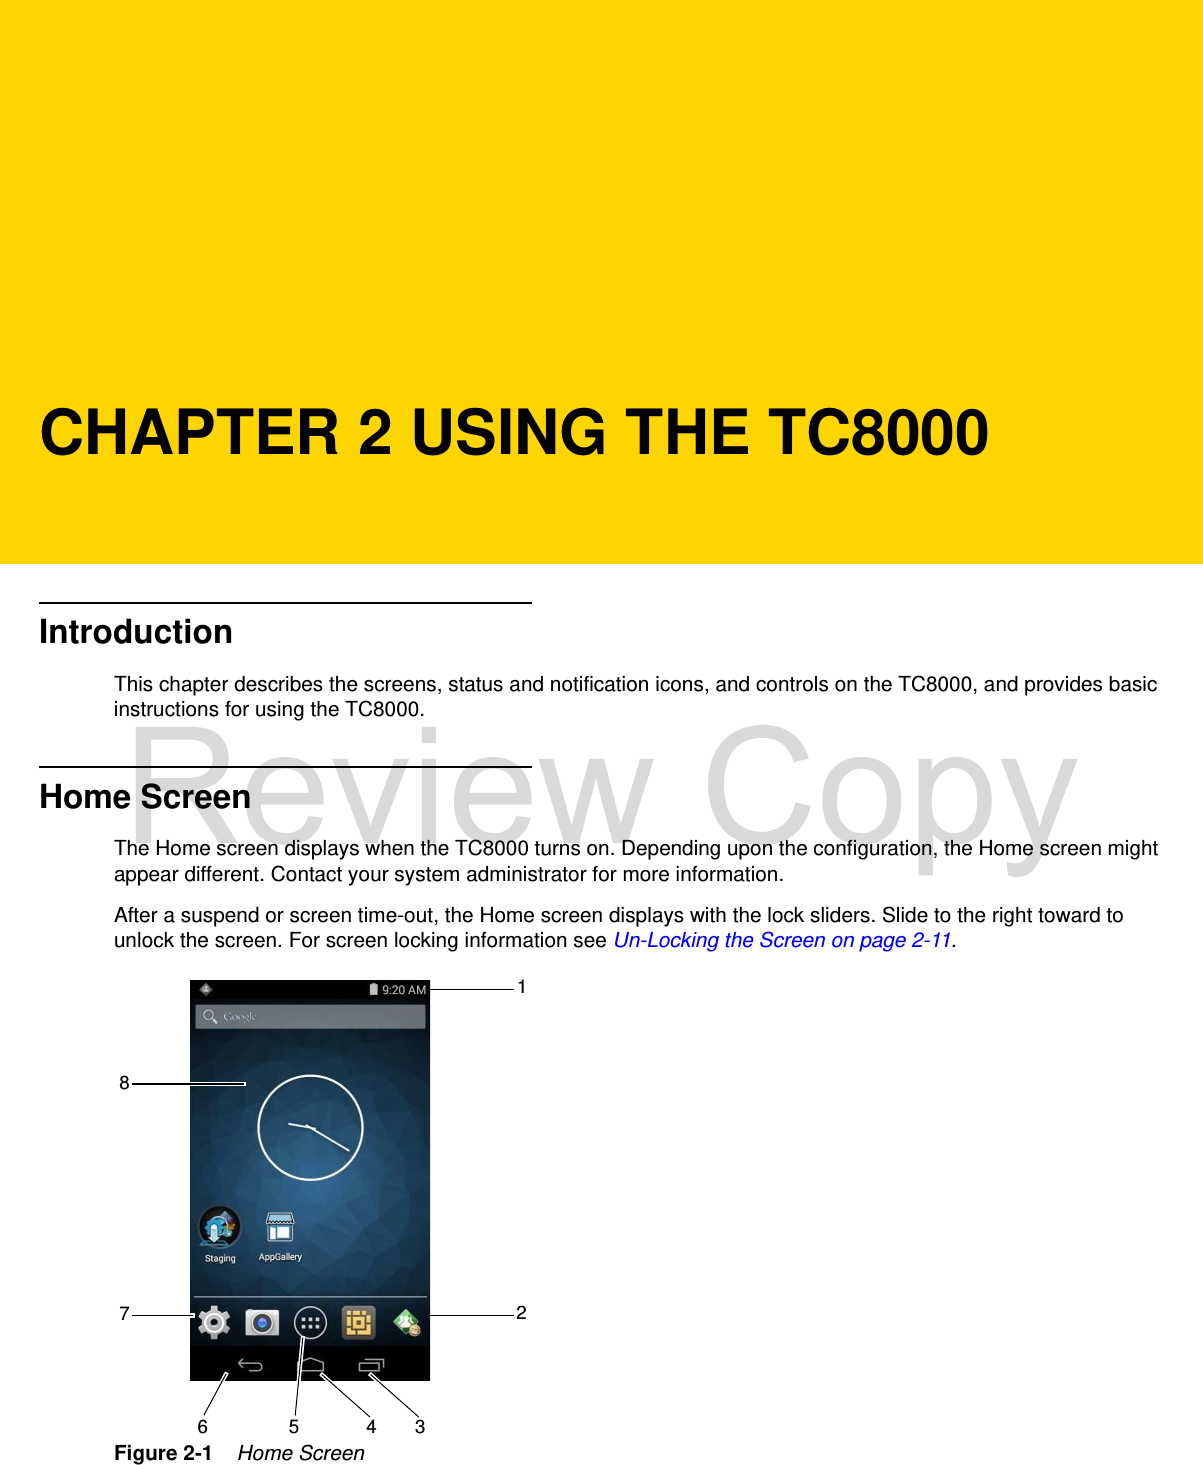 CHAPTER 2 USING THE TC8000IntroductionThis chapter describes the screens, status and notification icons, and controls on the TC8000, and provides basic instructions for using the TC8000.Home ScreenThe Home screen displays when the TC8000 turns on. Depending upon the configuration, the Home screen might appear different. Contact your system administrator for more information.After a suspend or screen time-out, the Home screen displays with the lock sliders. Slide to the right toward to unlock the screen. For screen locking information see Un-Locking the Screen on page 2-11.Figure 2-1    Home Screen12346 578Review Copy